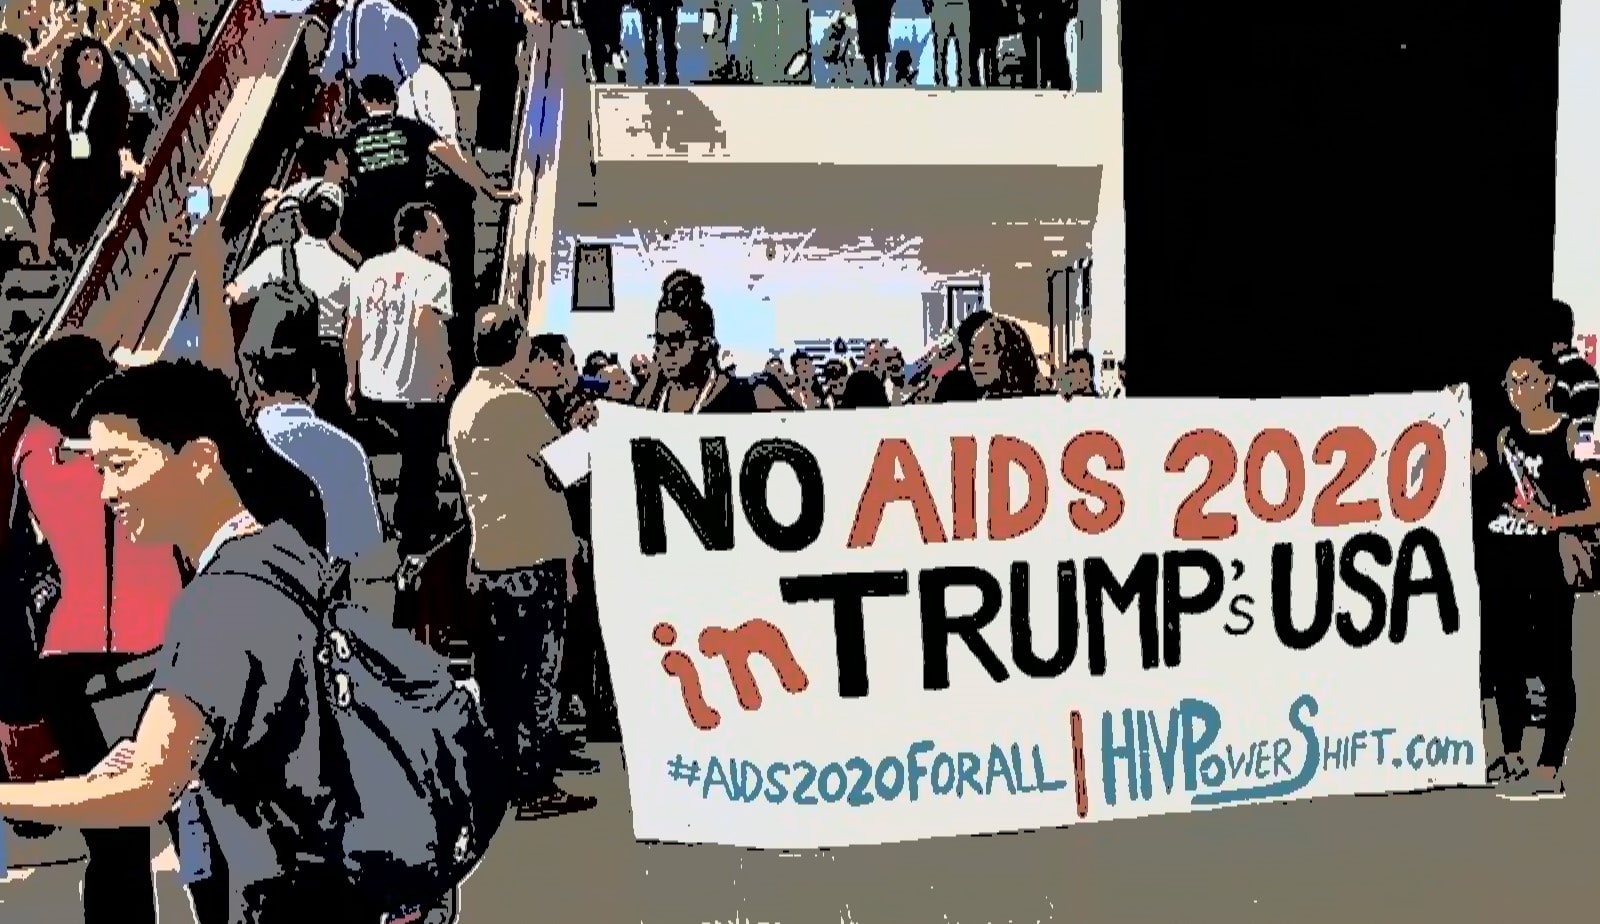 AIDS2020 Will Welcome All the Right People to the USA. What a Travesty.